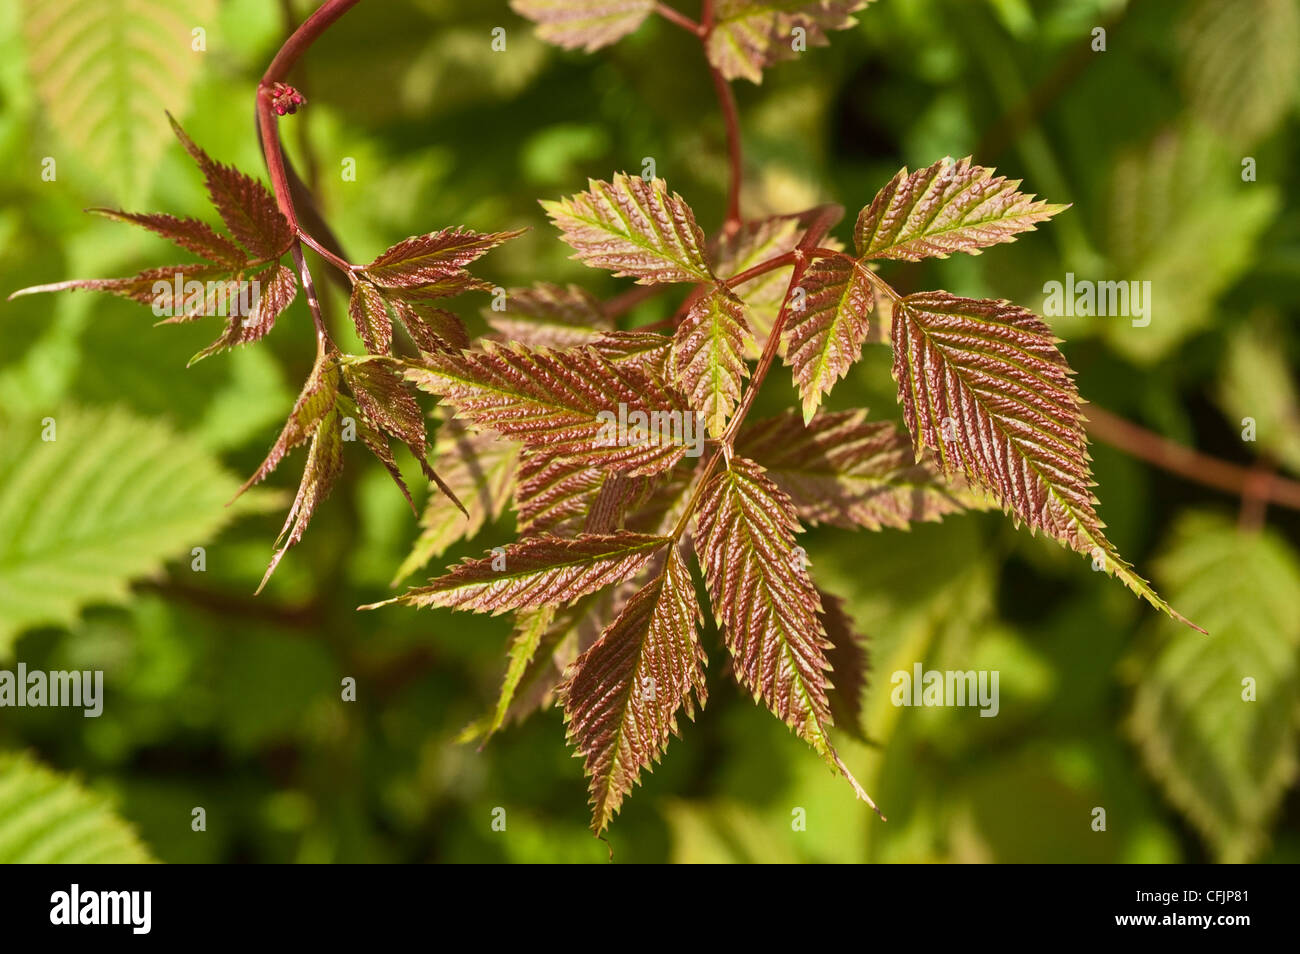 Brown young leaves of Goats beard, Brides feathers,Aruncus dioicus, Rosaceae, Stock Photo